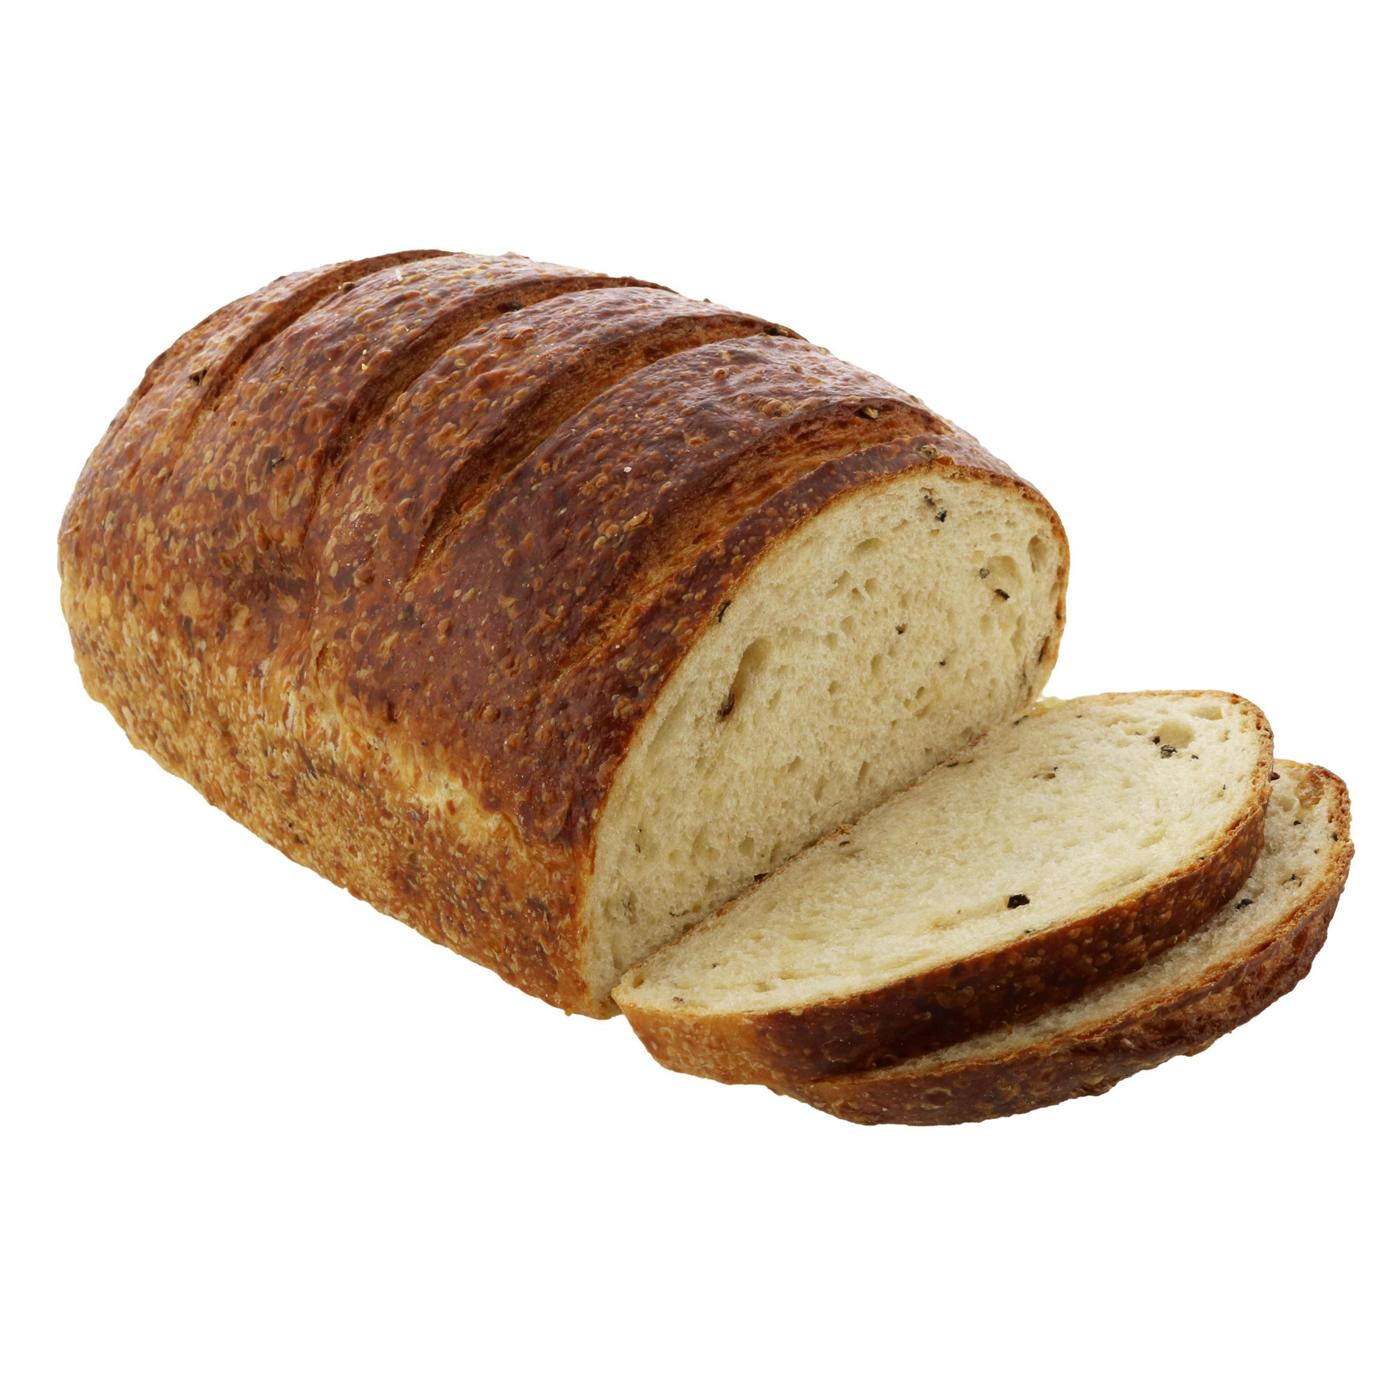 H-E-B Bakery Scratch Parmesan Cracked Pepper Bread; image 1 of 2